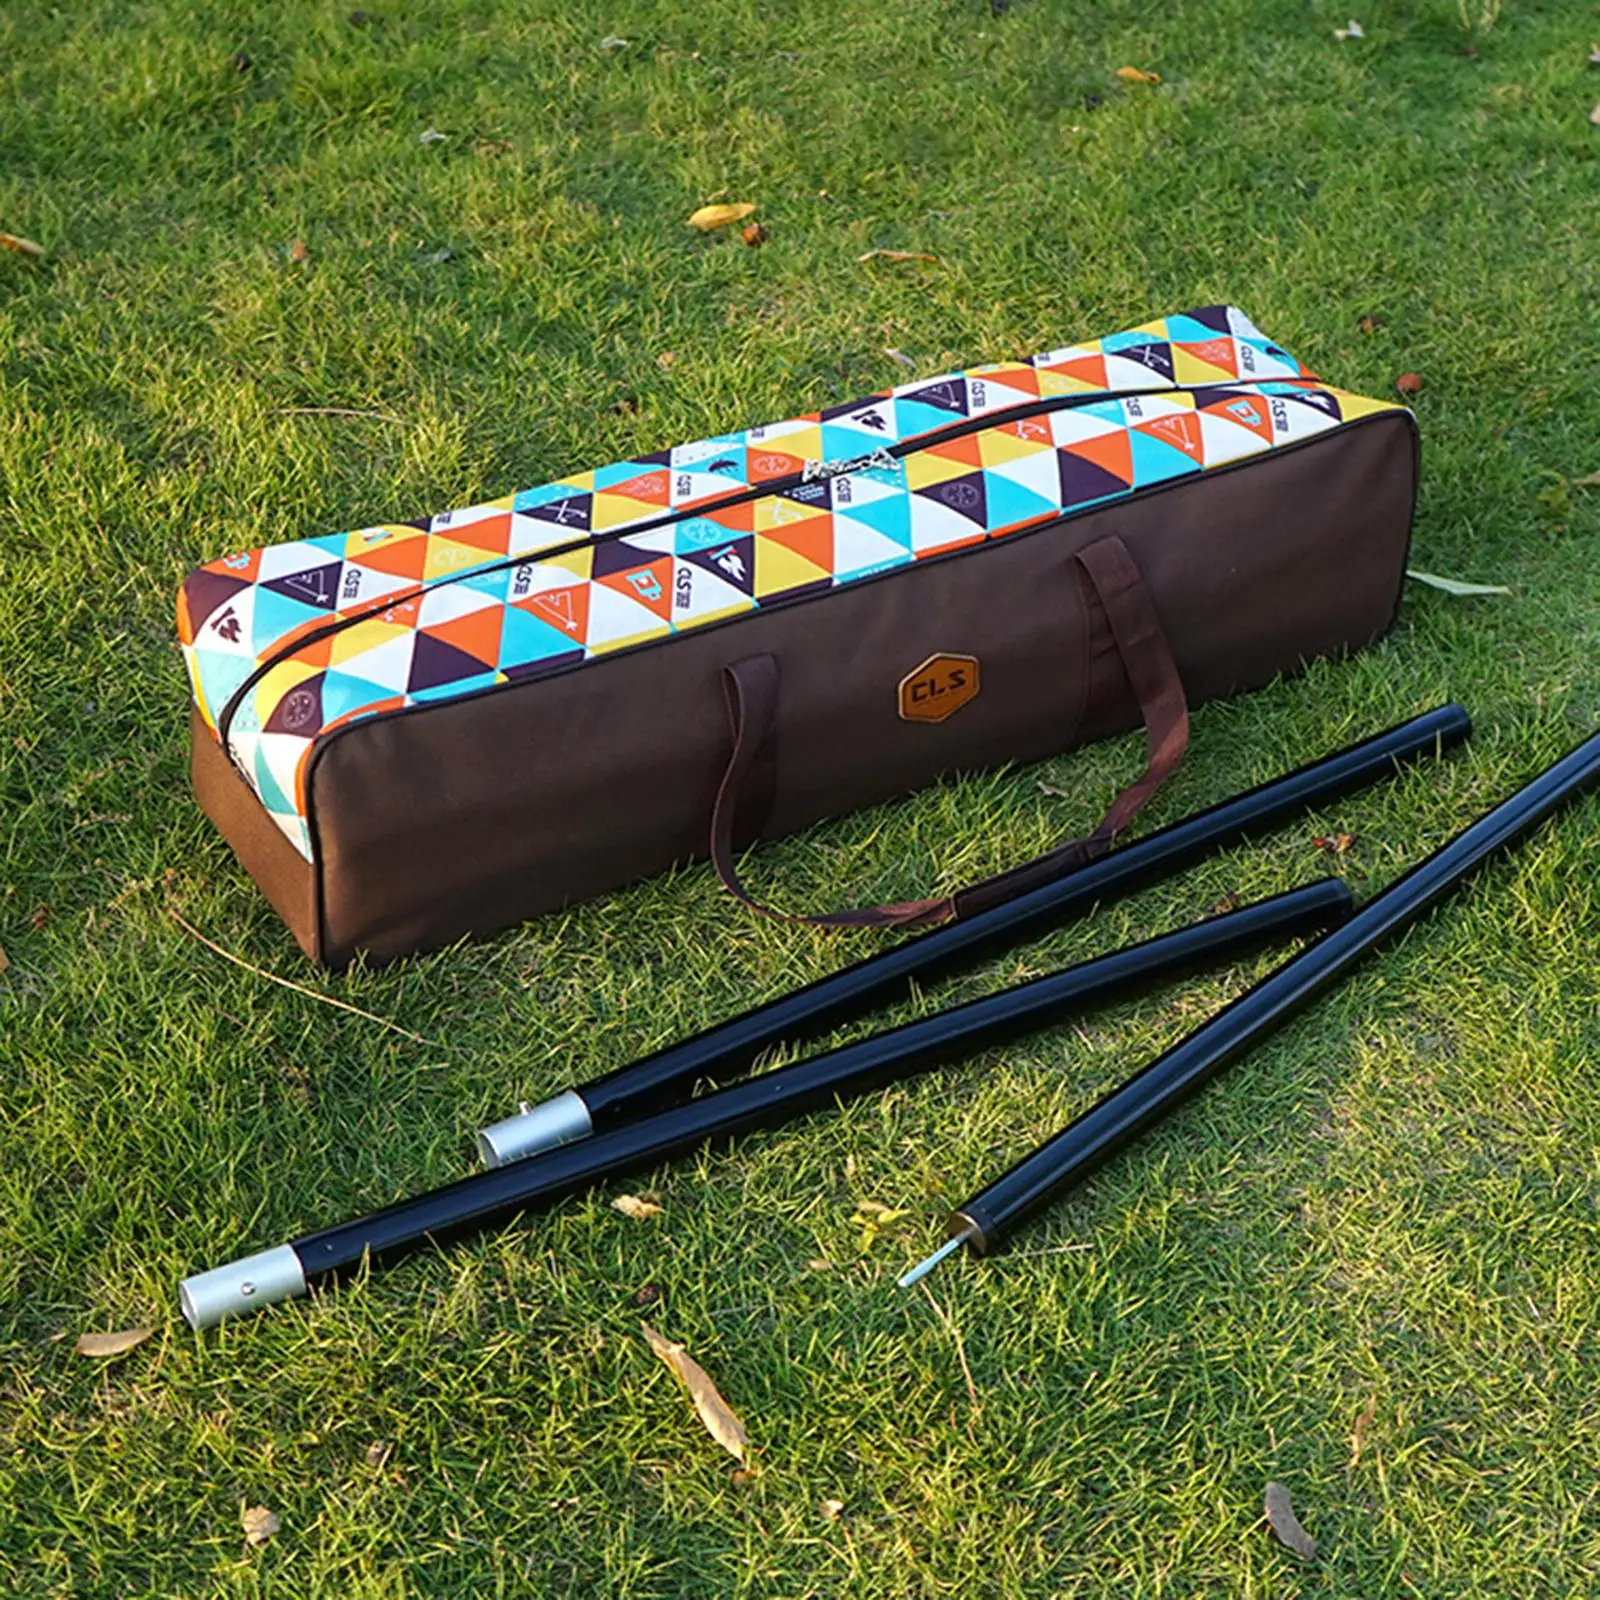 Awning Tent Pole Storage Bag Waterproof Camp Equipment Fishing Rod Outdoor